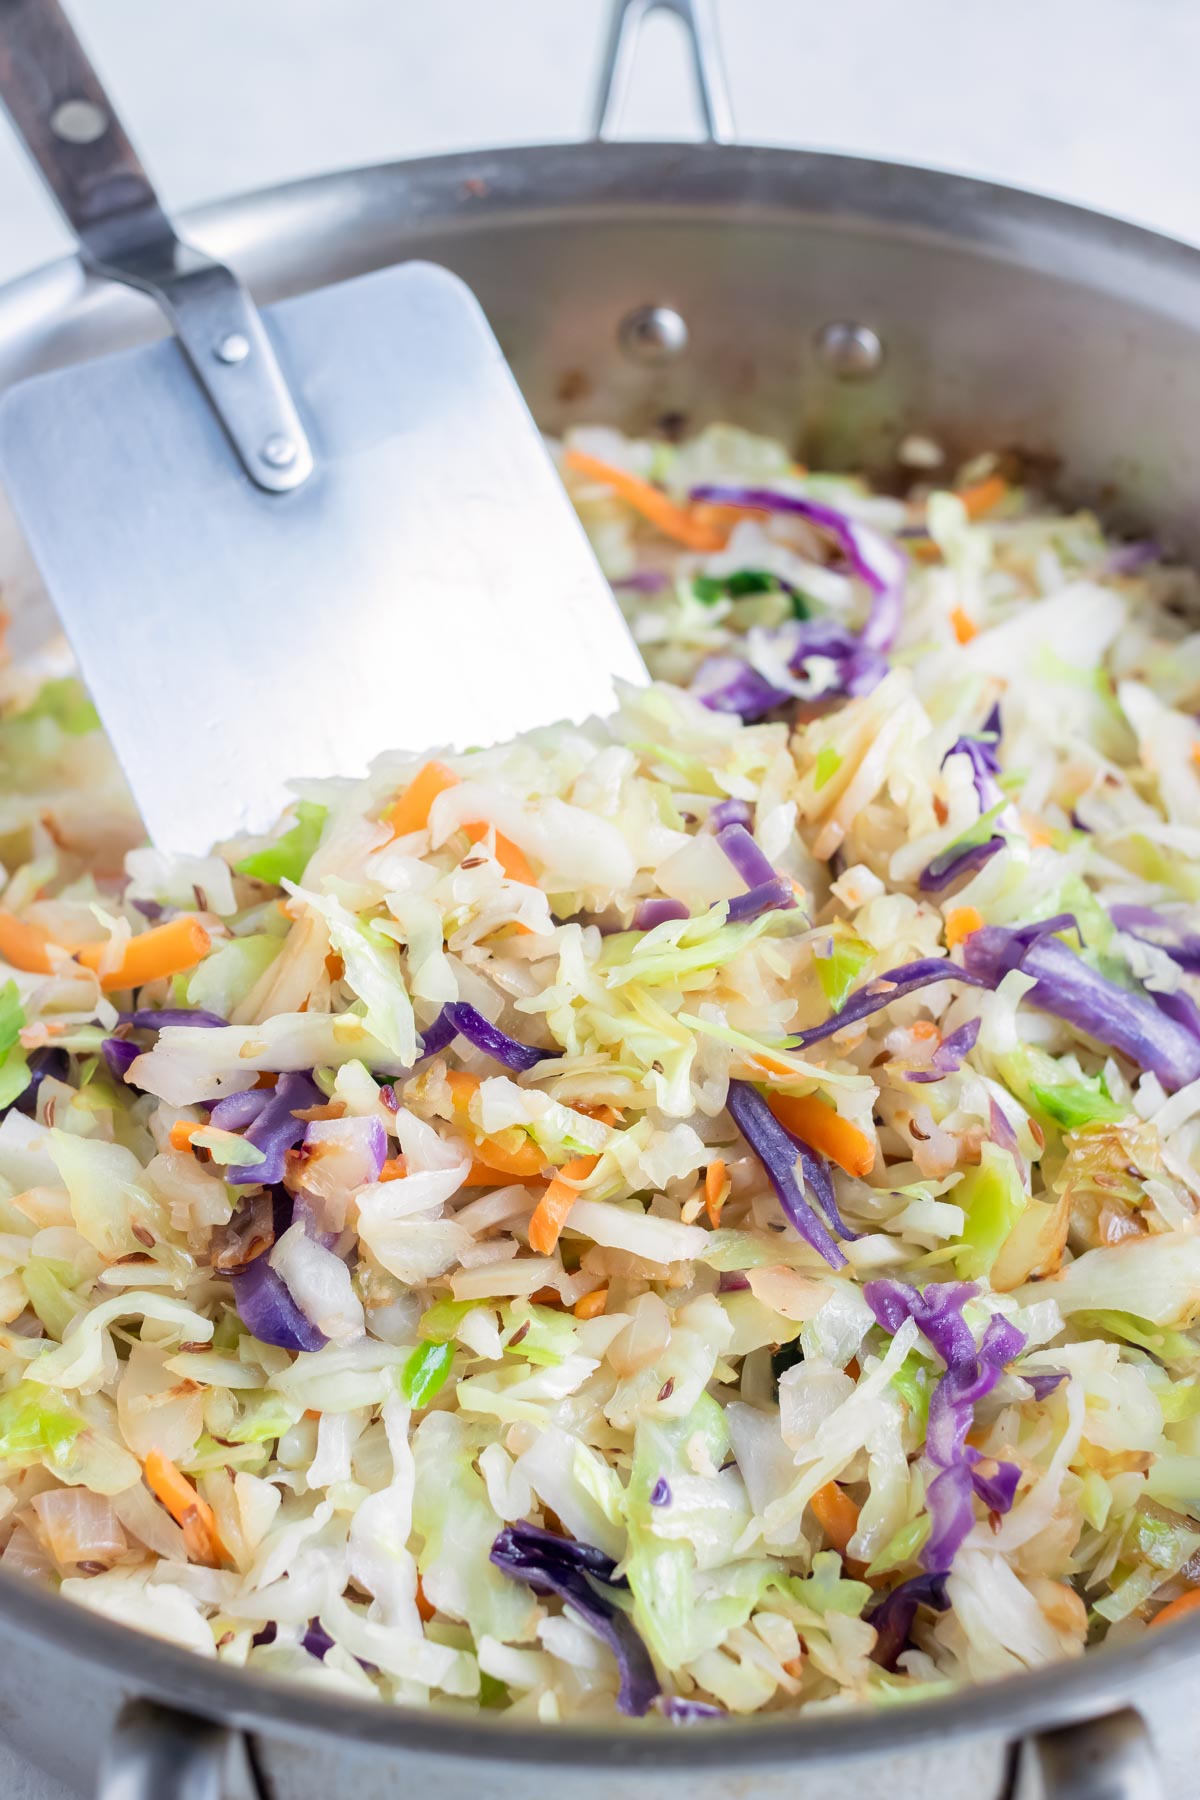 The shredded cabbage is sautéed on the stove.